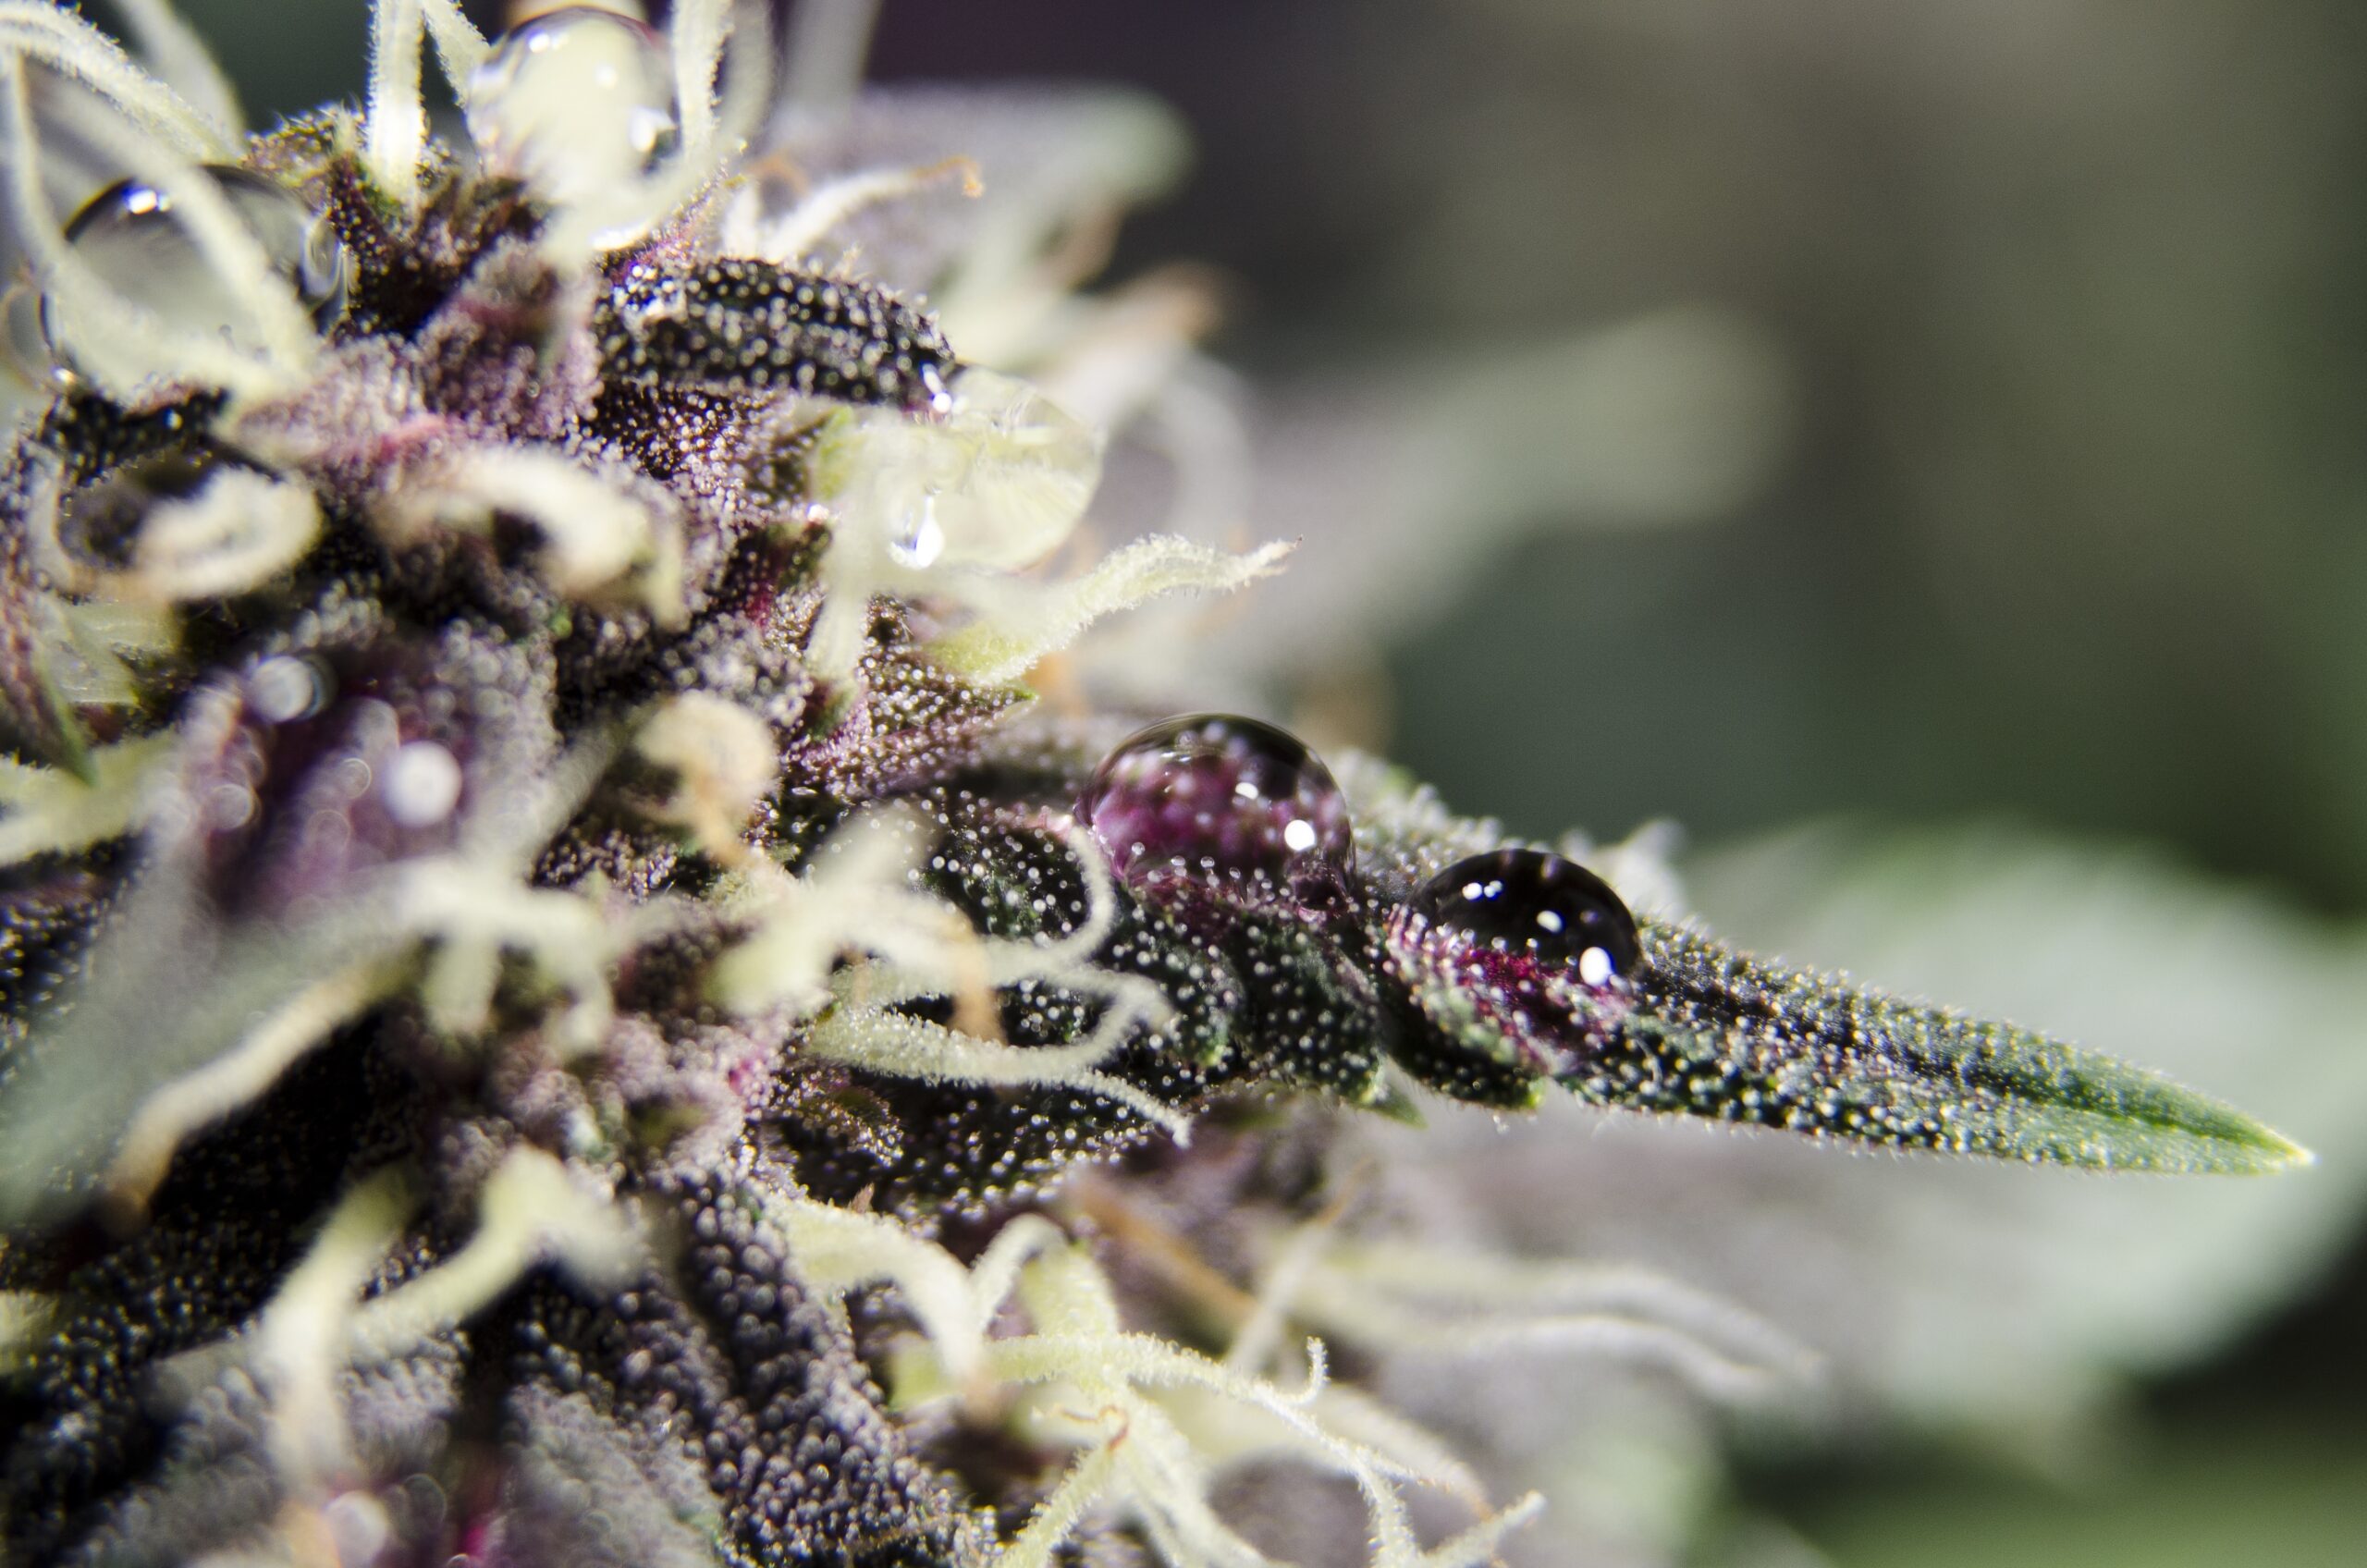 purple-high-thc-cannabis-flower-with-resin